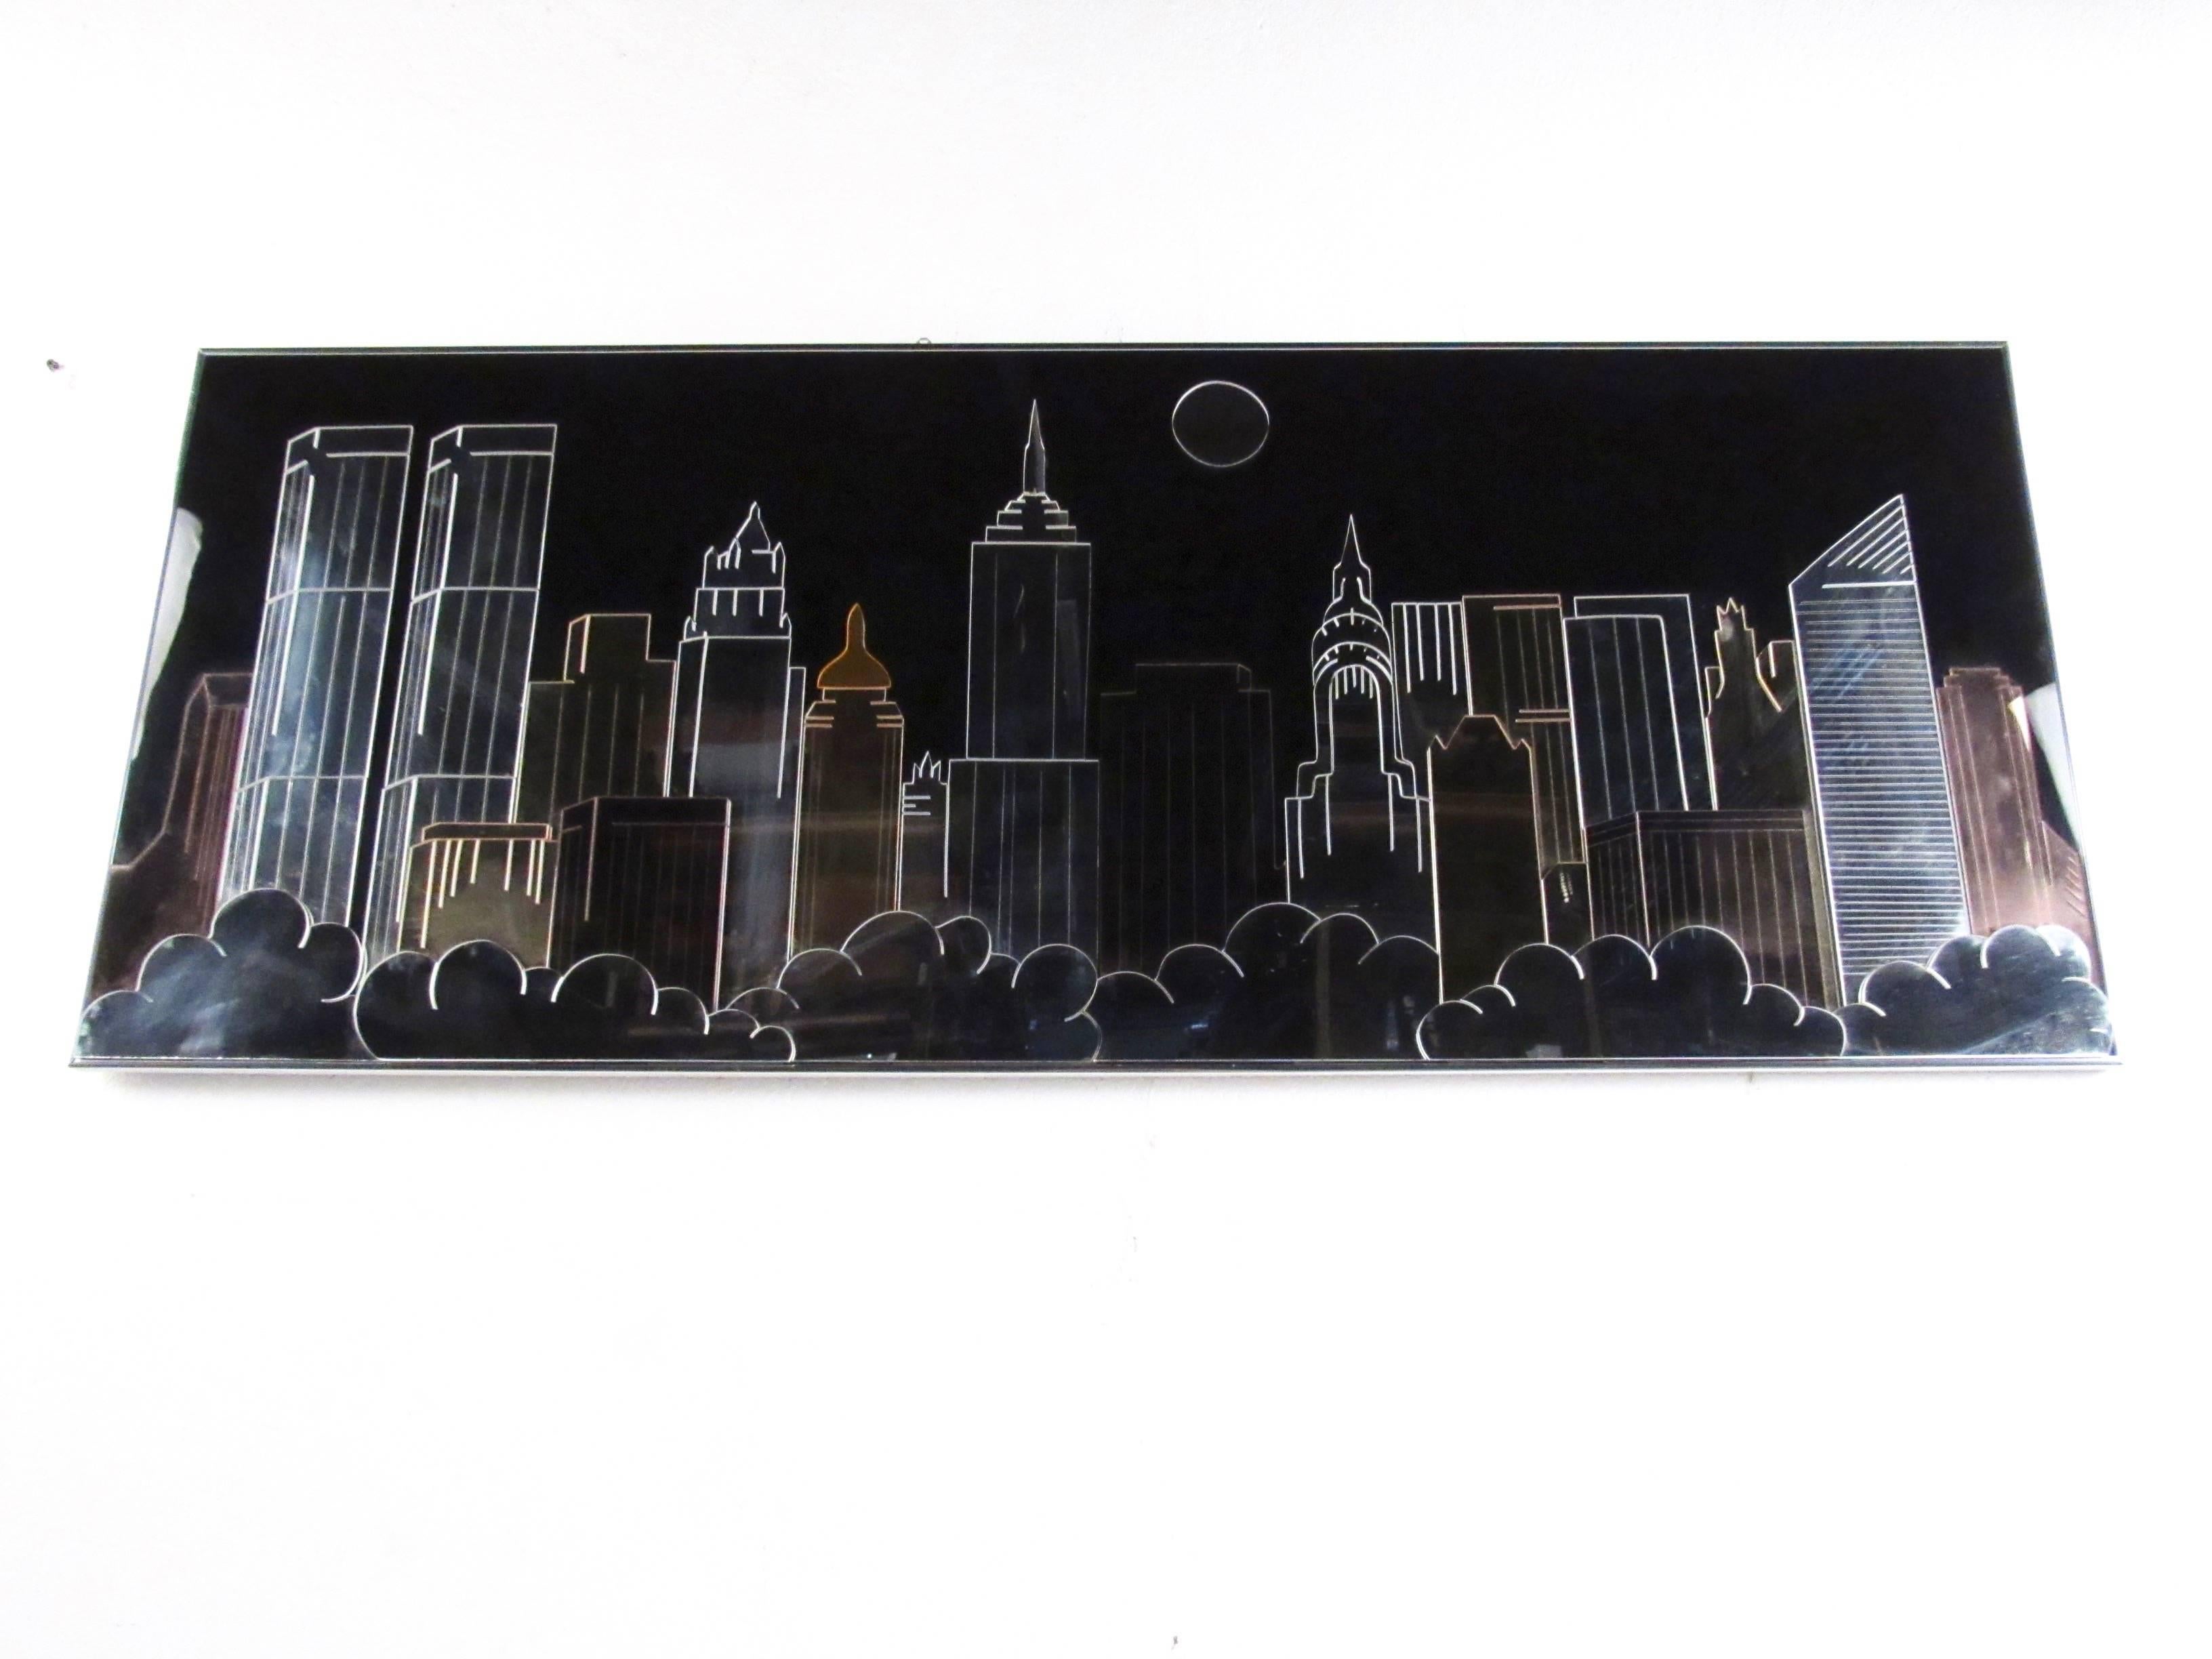 This stylish vintage modern wall art features mixed metal, acrylic, and mirror to create a New York City skyline effect with twin towers, Empire state building, and more. Contemporary modern decorator feel makes an interesting, 1980s style wall